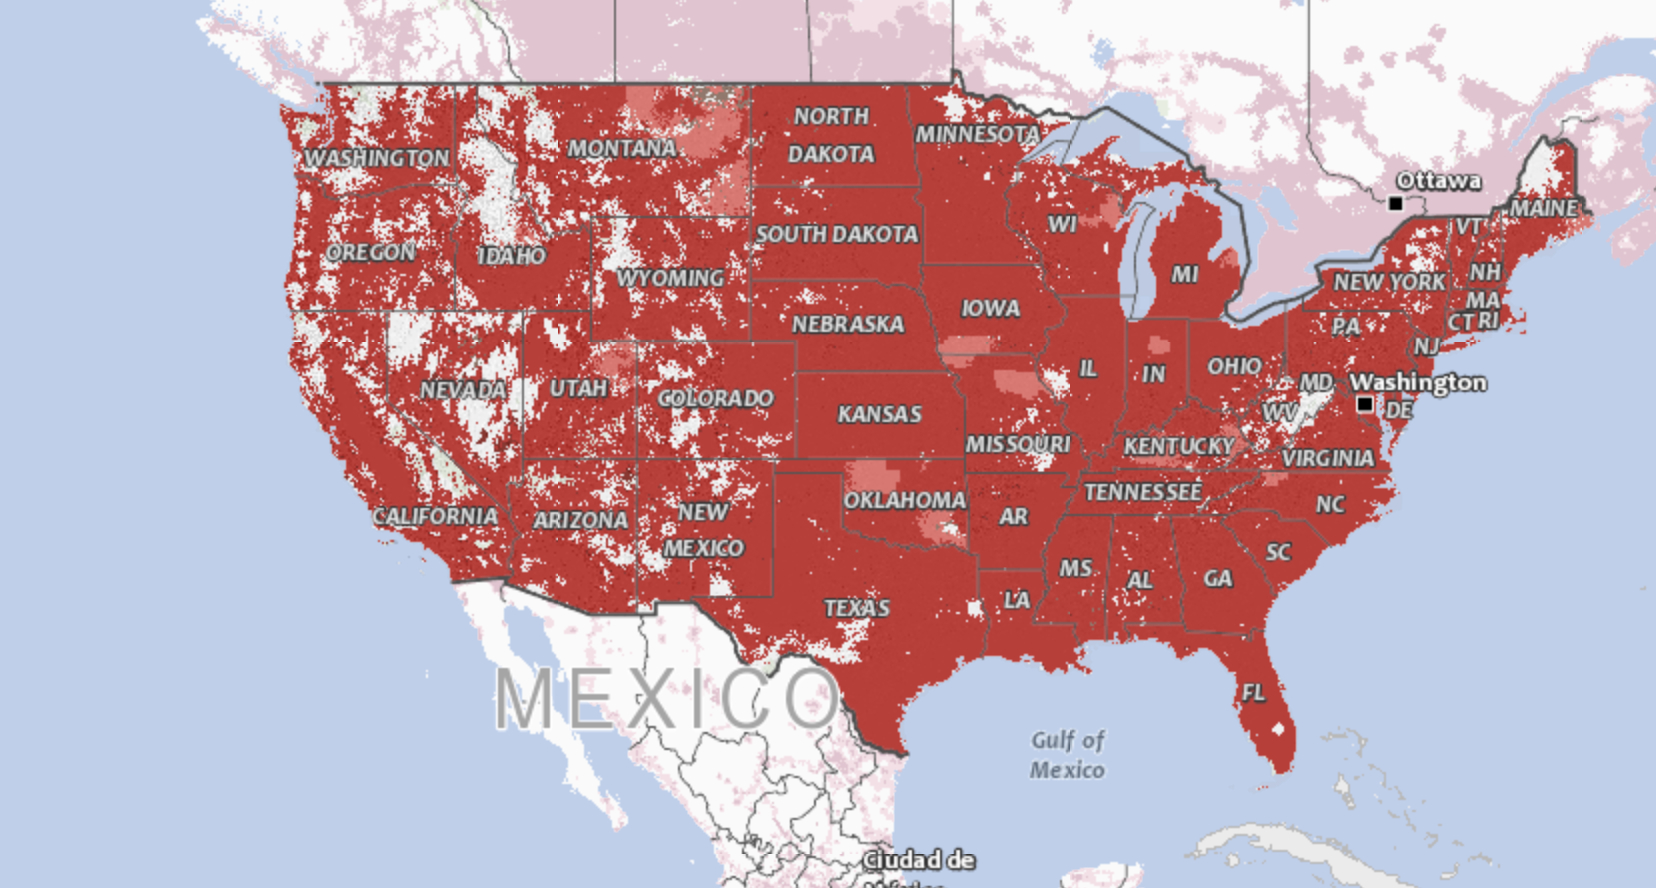 The Fcc Is Investigating Cell Carriers&amp;#039; Wireless Coverage Maps - Verizon Wireless Coverage Map California